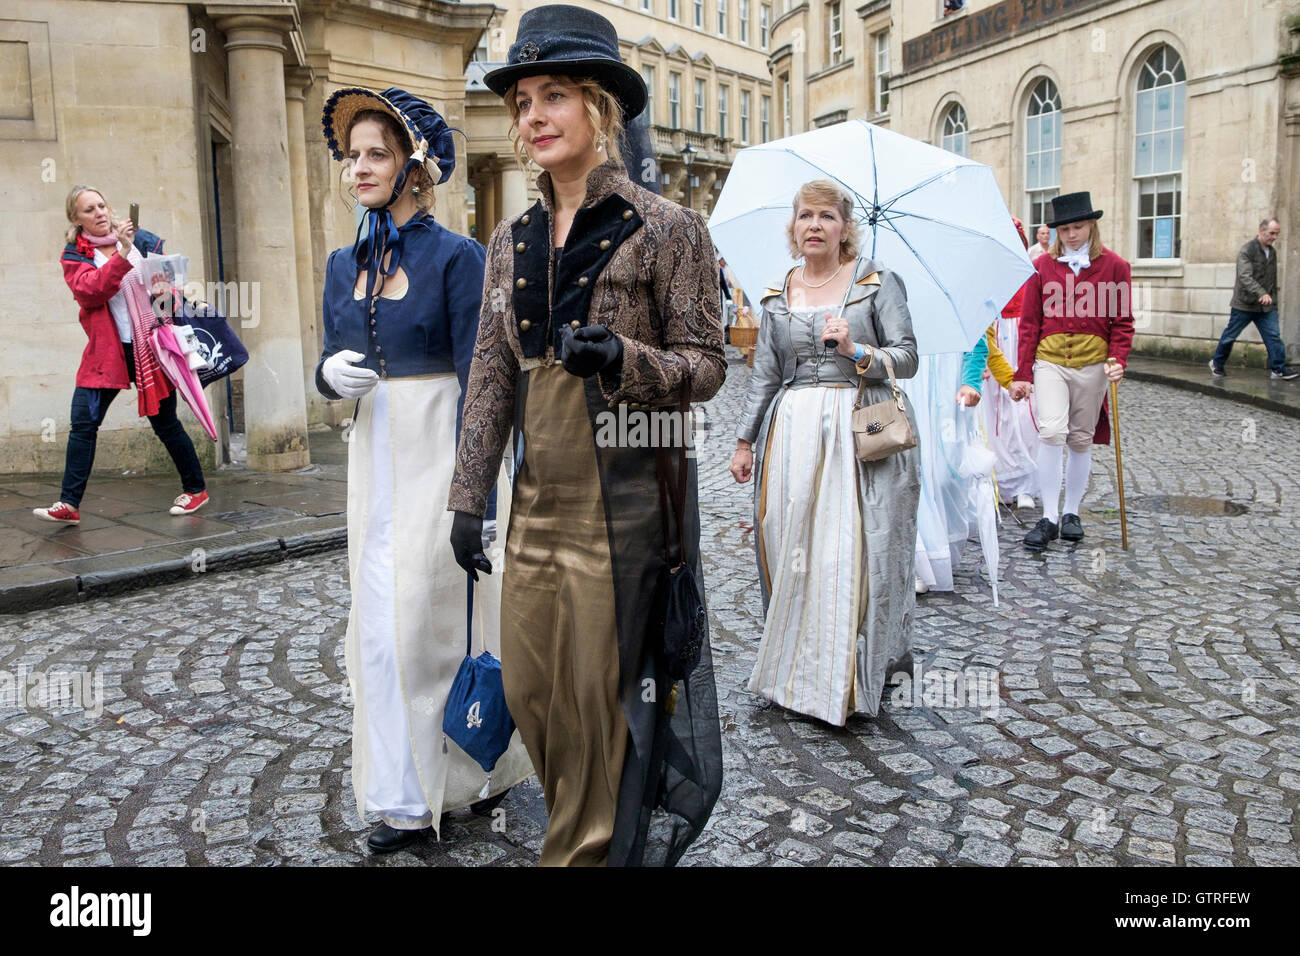 Bath, UK. 10th Sep, 2016. Jane Austen fans are pictured taking part in the world famous Grand Regency Costumed Promenade. The Promenade, part of the Jane Austen Festival is a procession through the streets of Bath and the participants who come from all over the world dress in 18th Century costume. Credit:  lynchpics/Alamy Live News Stock Photo